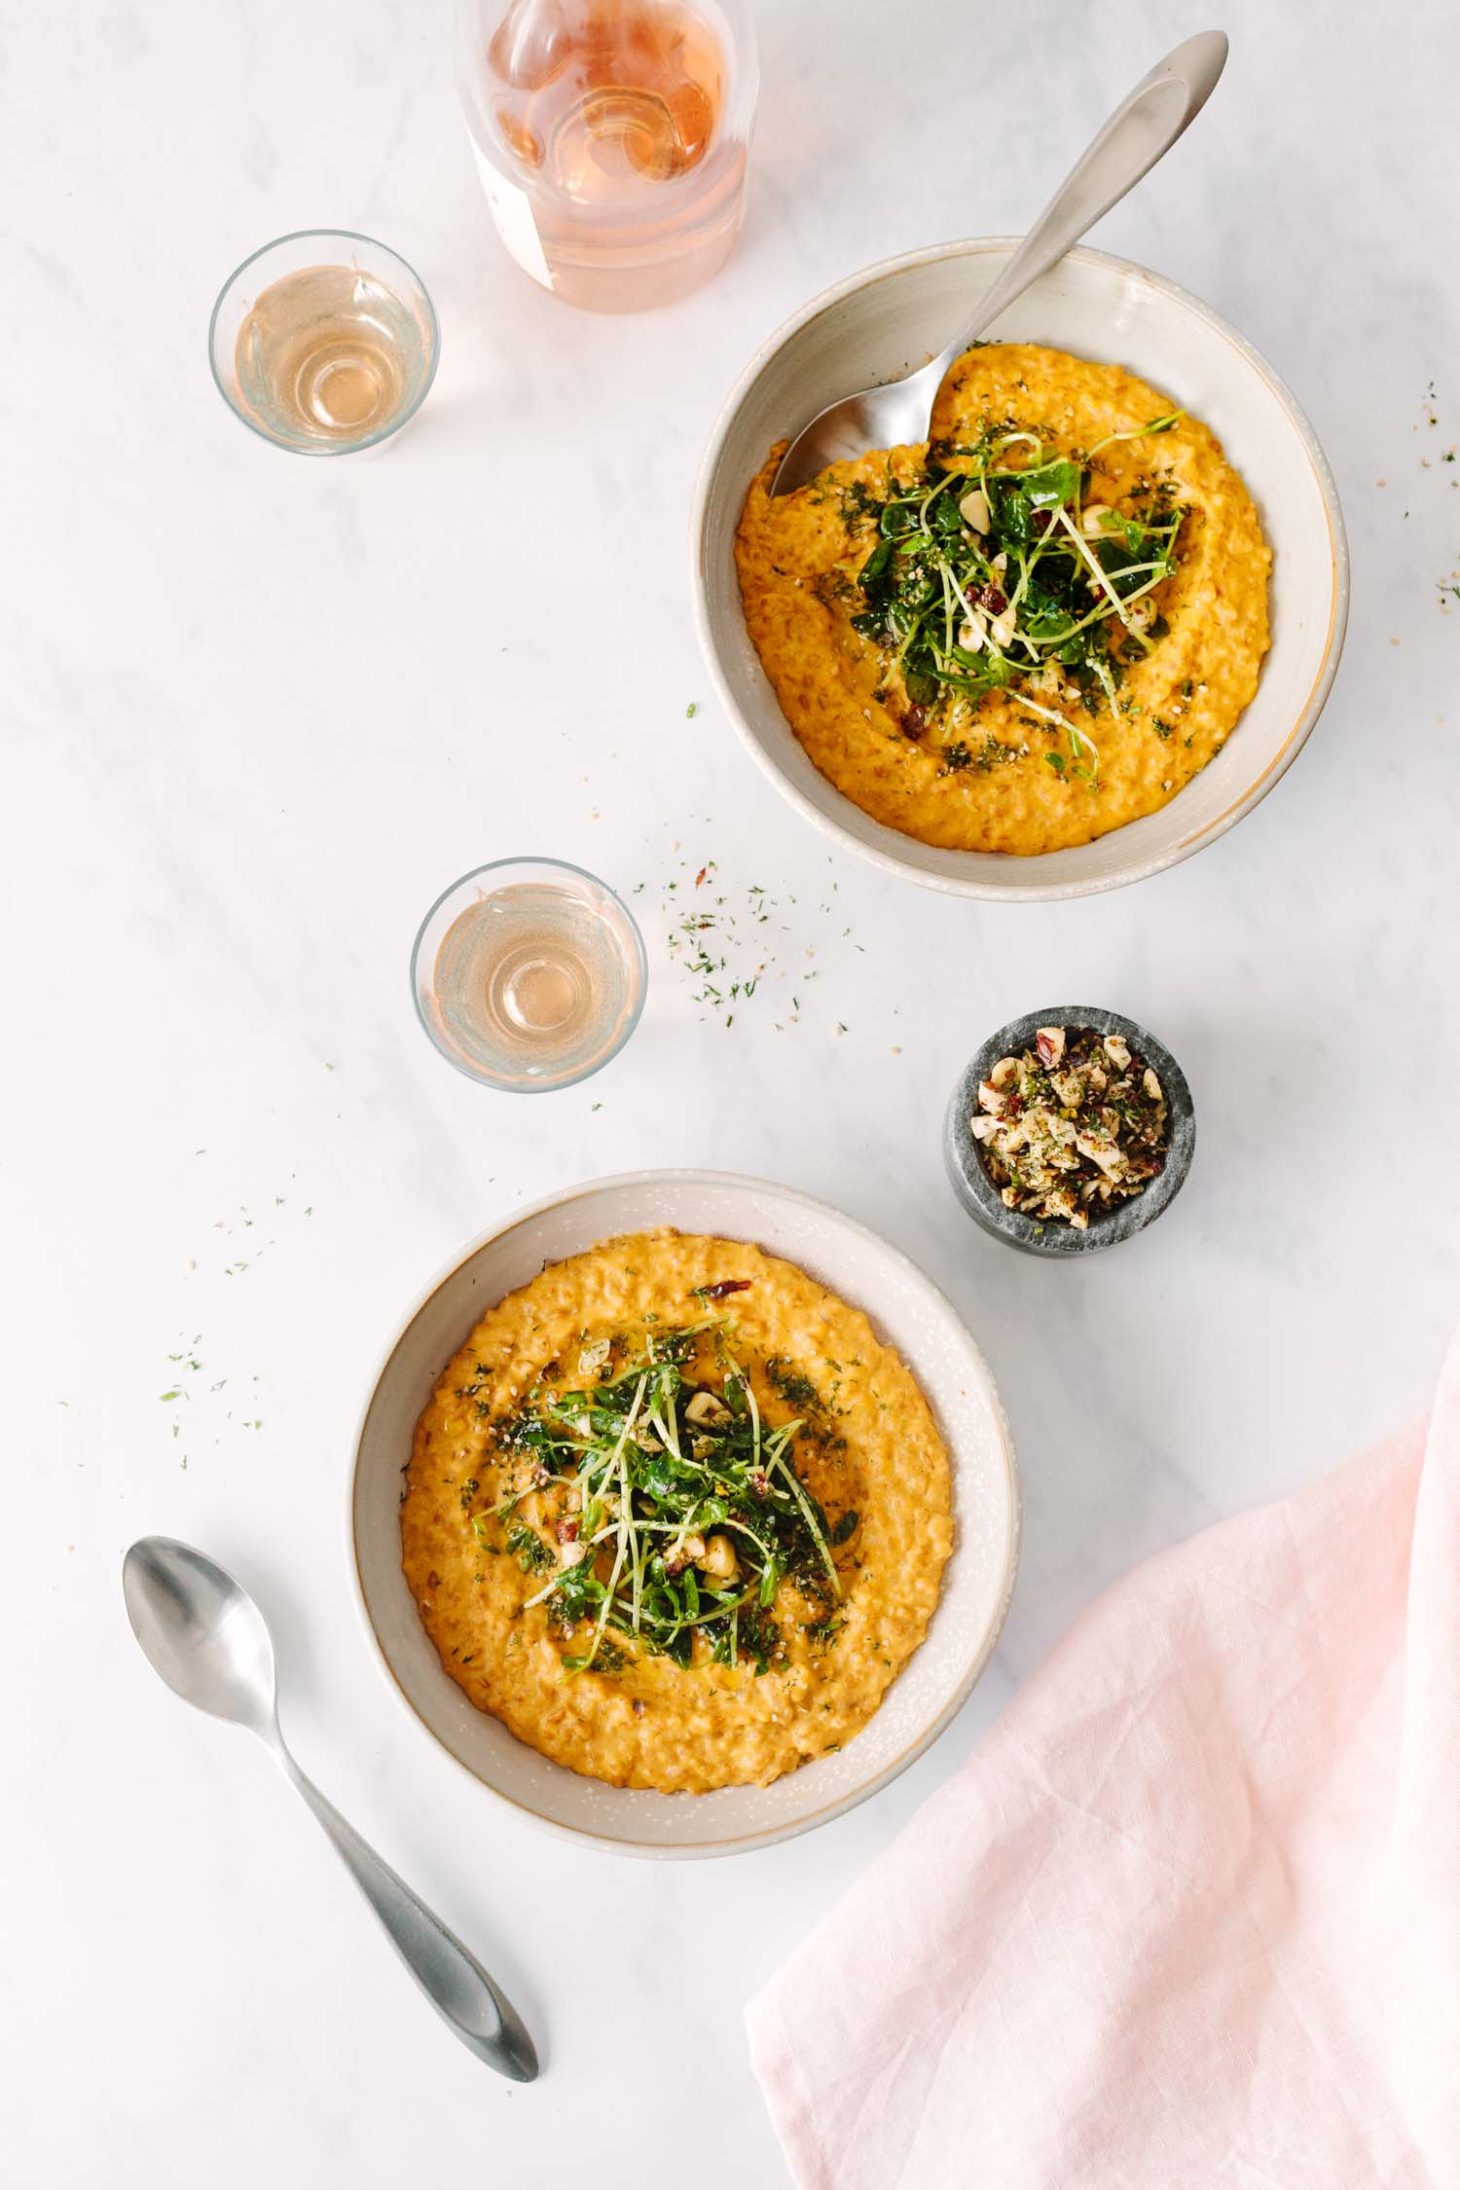 Overhead photograph of two bowls of Creamy Vegan Carrot Risotto Topped with Pea Shoots and Dill Hazelnuts.